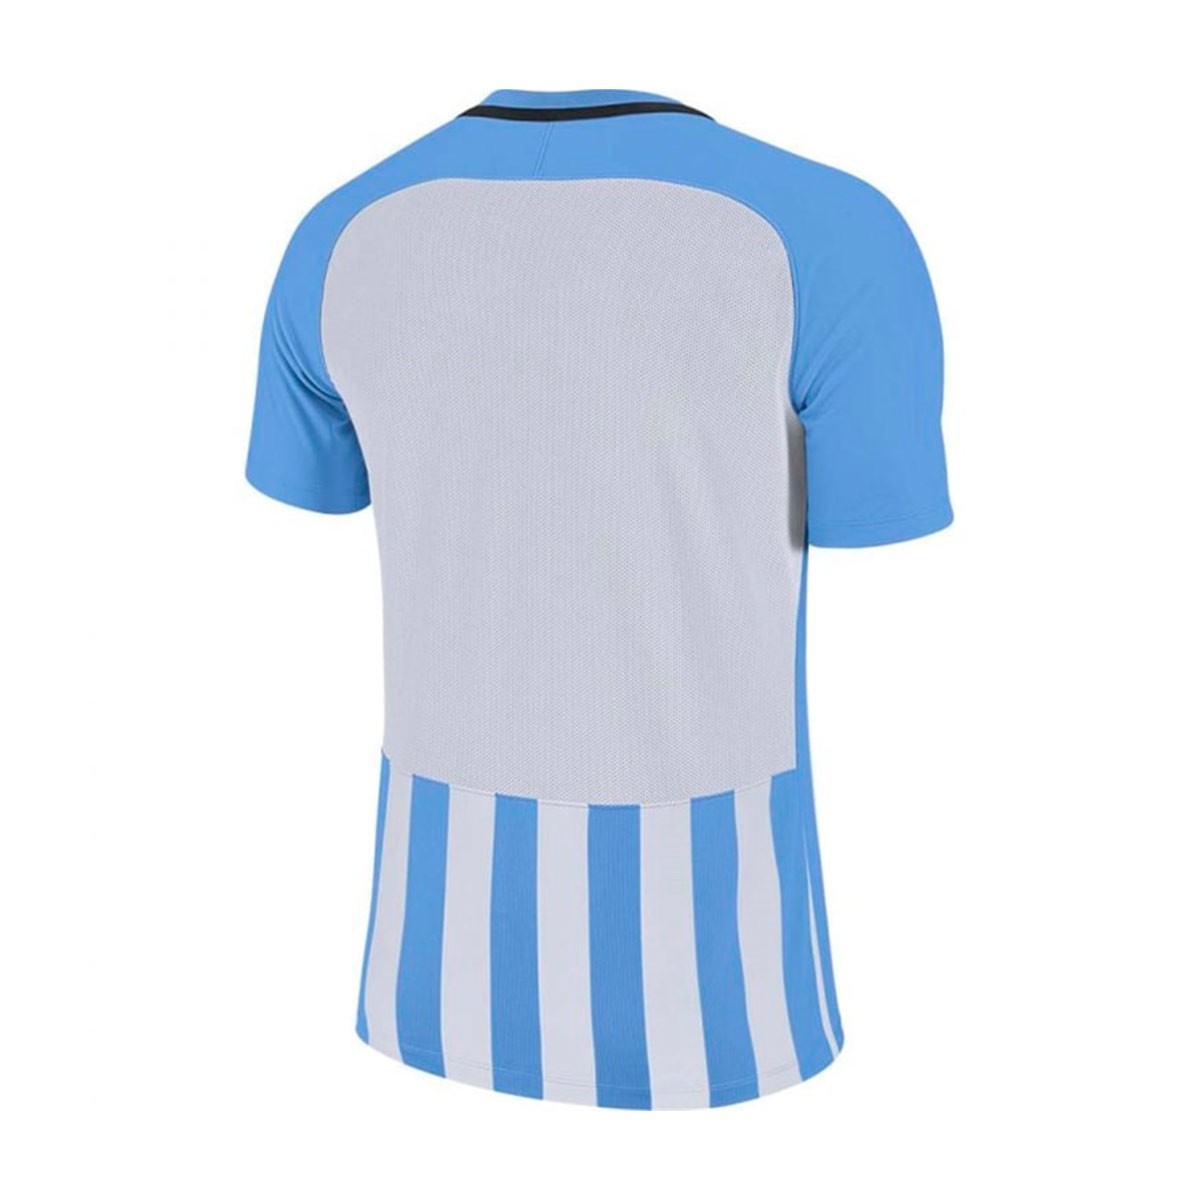 blue and white football jersey